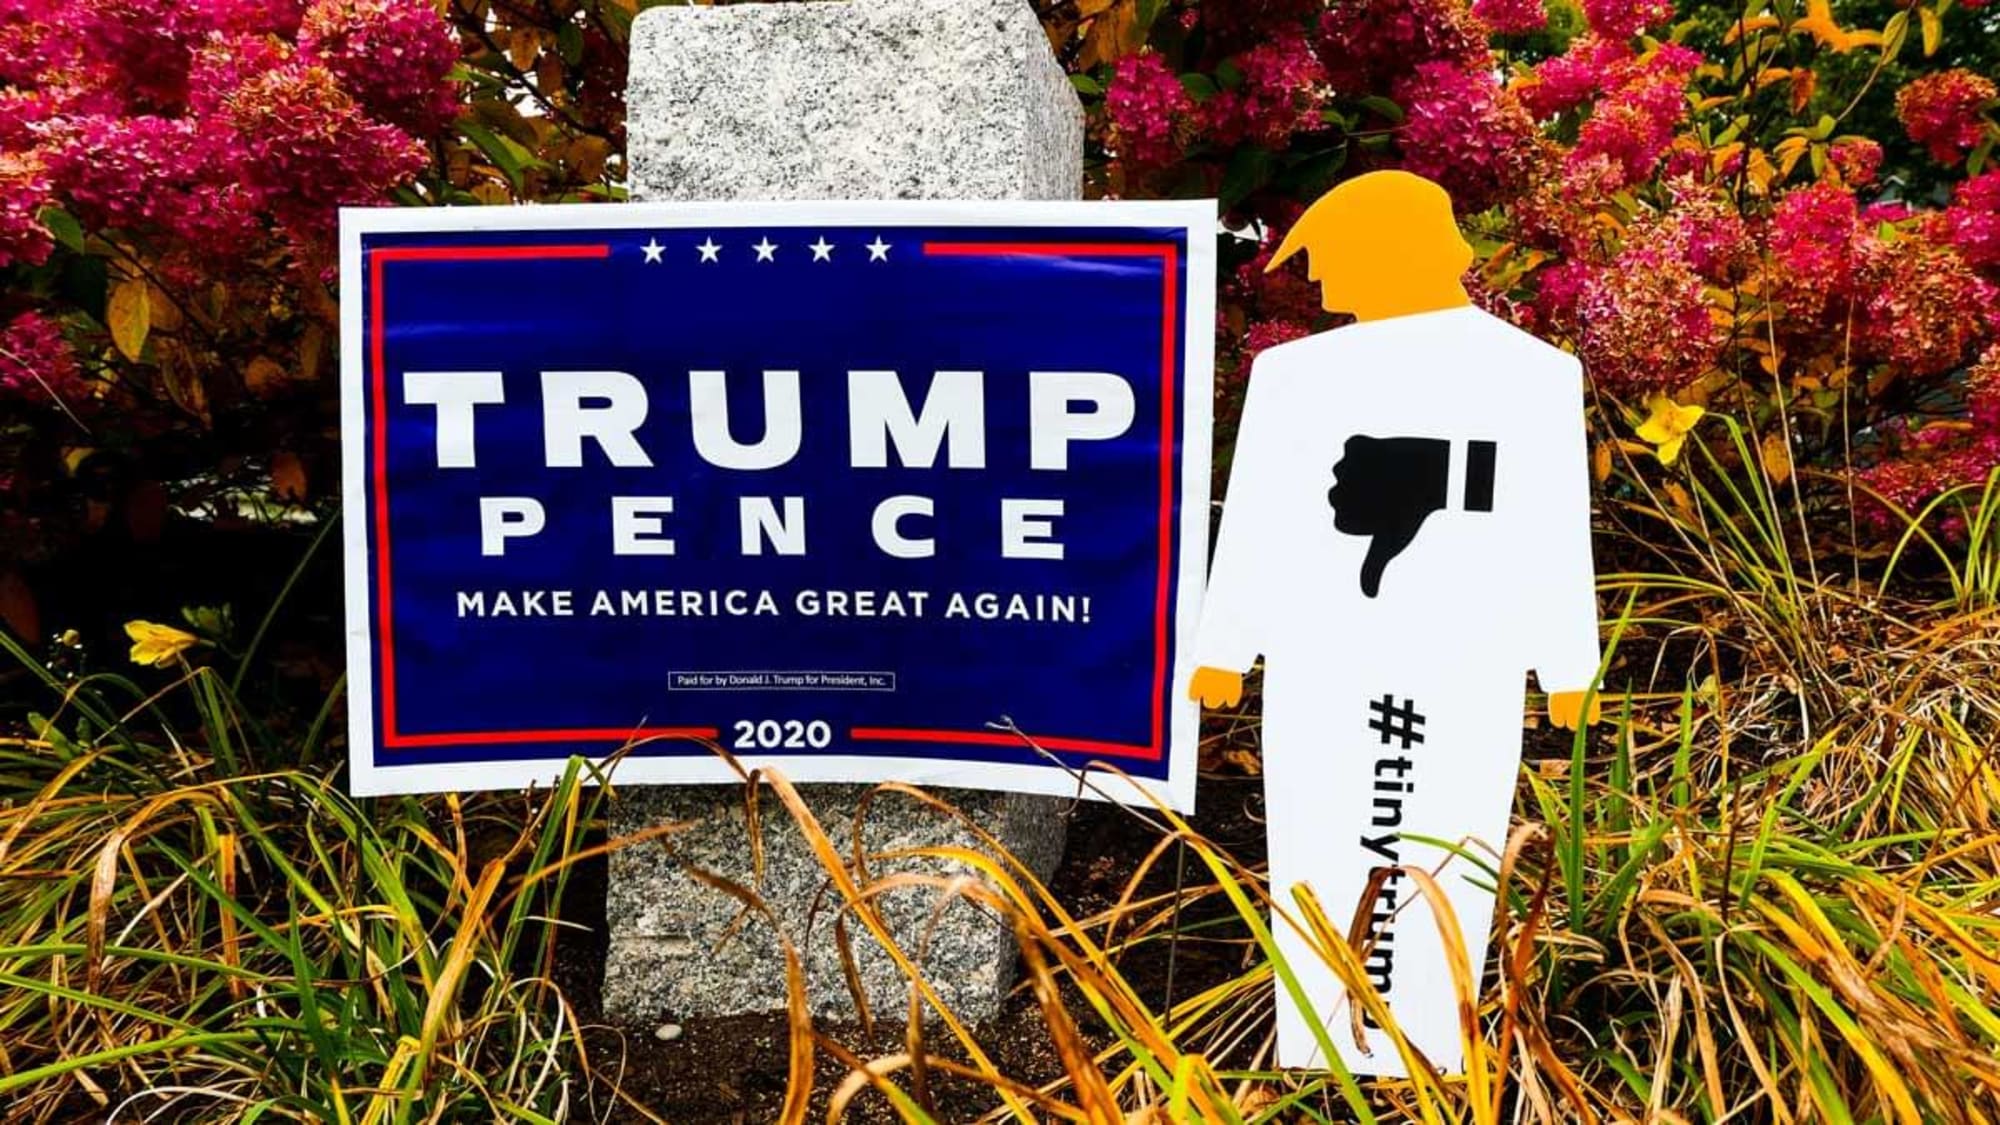 Photograph of a tiny trump lawn sign shown next to a trump/pense campaign sign. The two signs are situated in a garden on a lawn. The tiny trump sign is taller than the trump/pense sign by about six inches